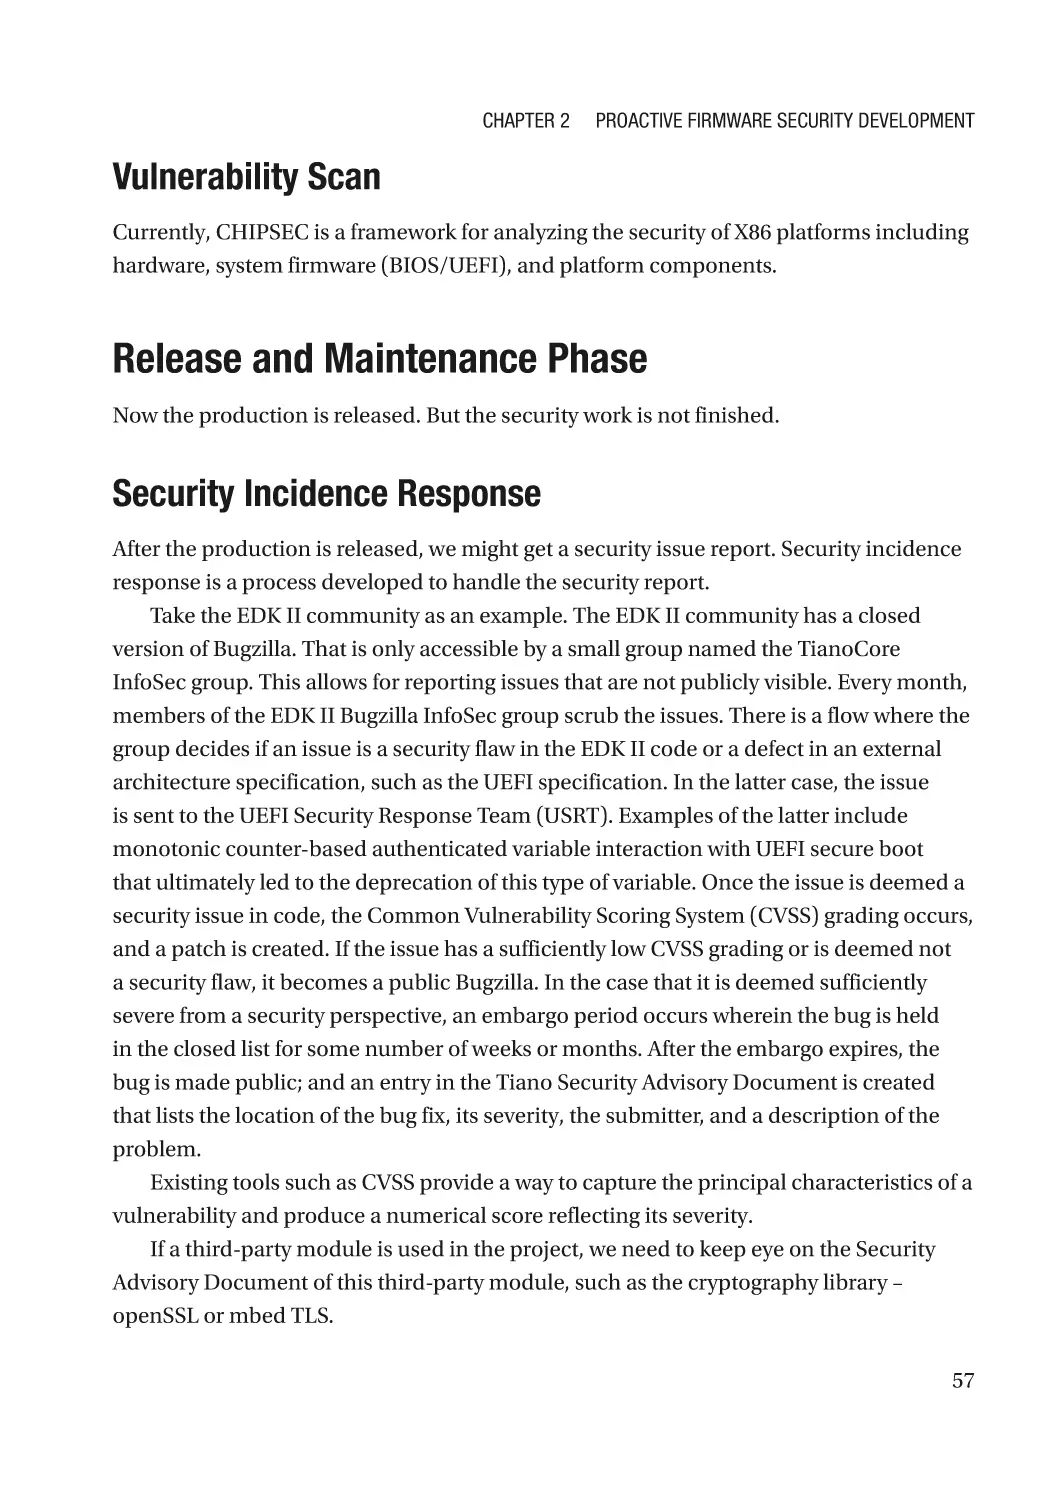 Vulnerability Scan
Release and Maintenance Phase
Security Incidence Response